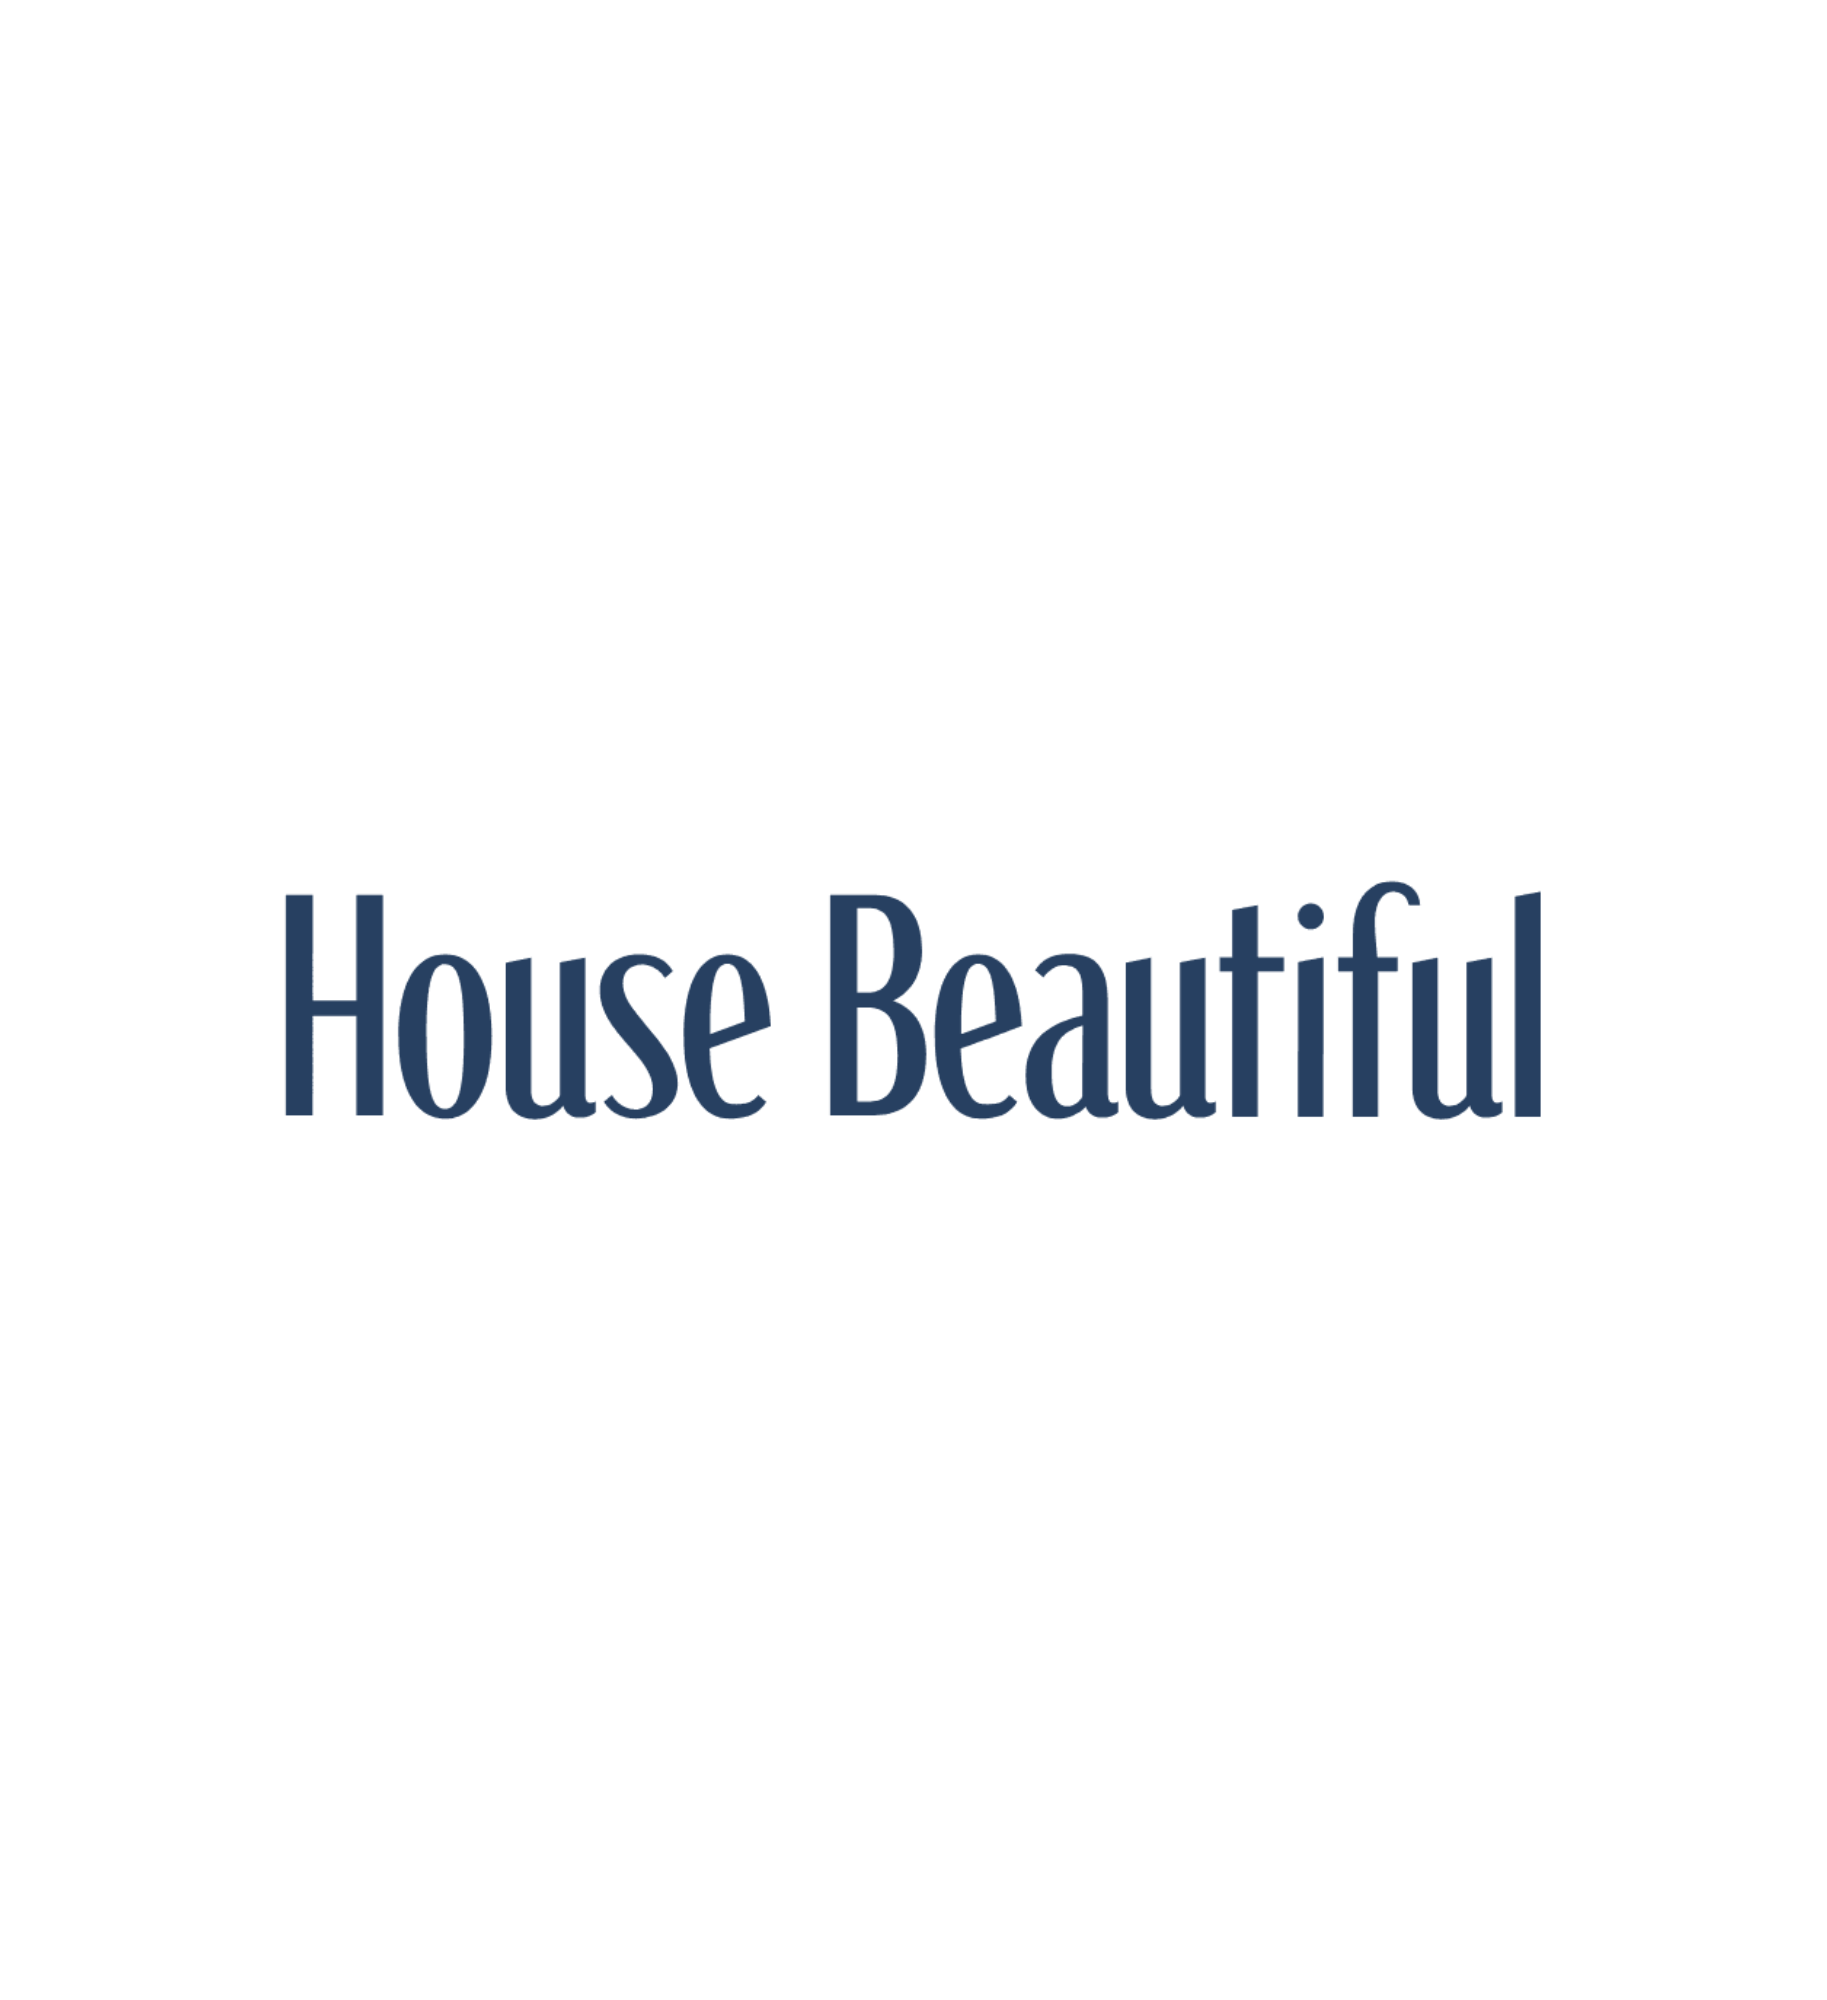 HOUSE_BEAUTIFUL.png